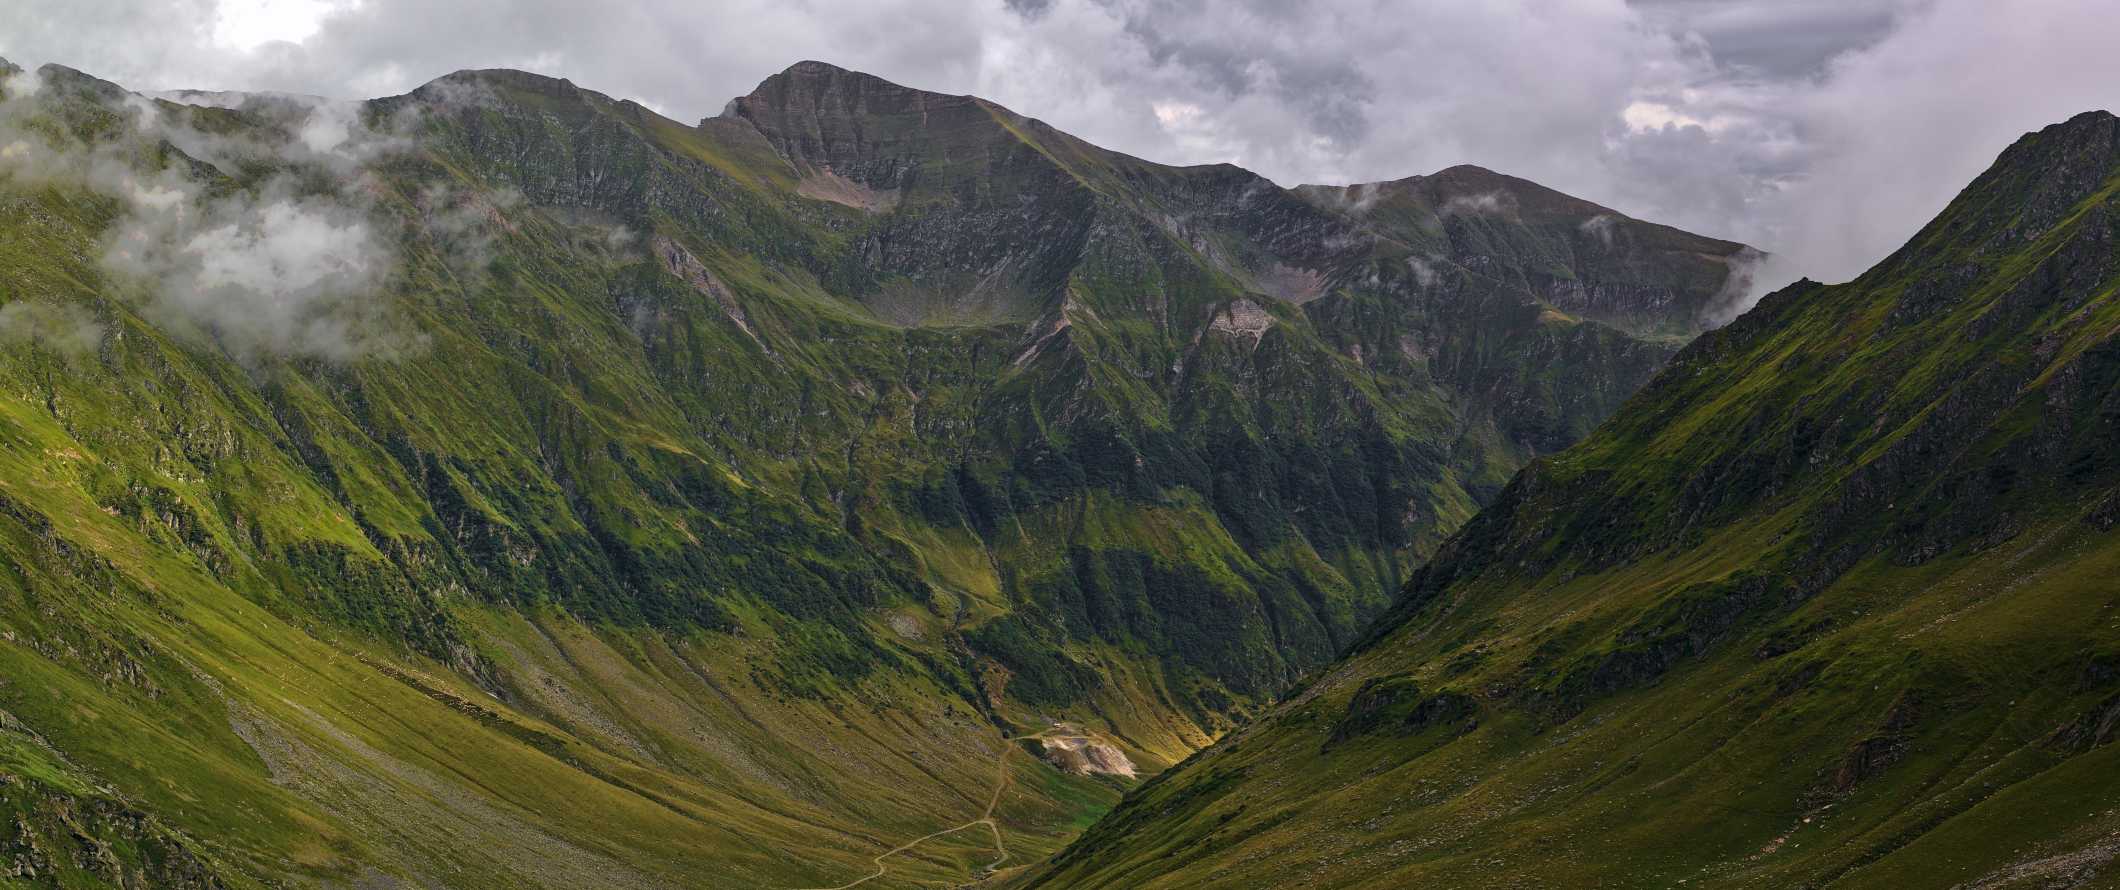 The dramatic green peaks of the Faragas Mountains in Romania.